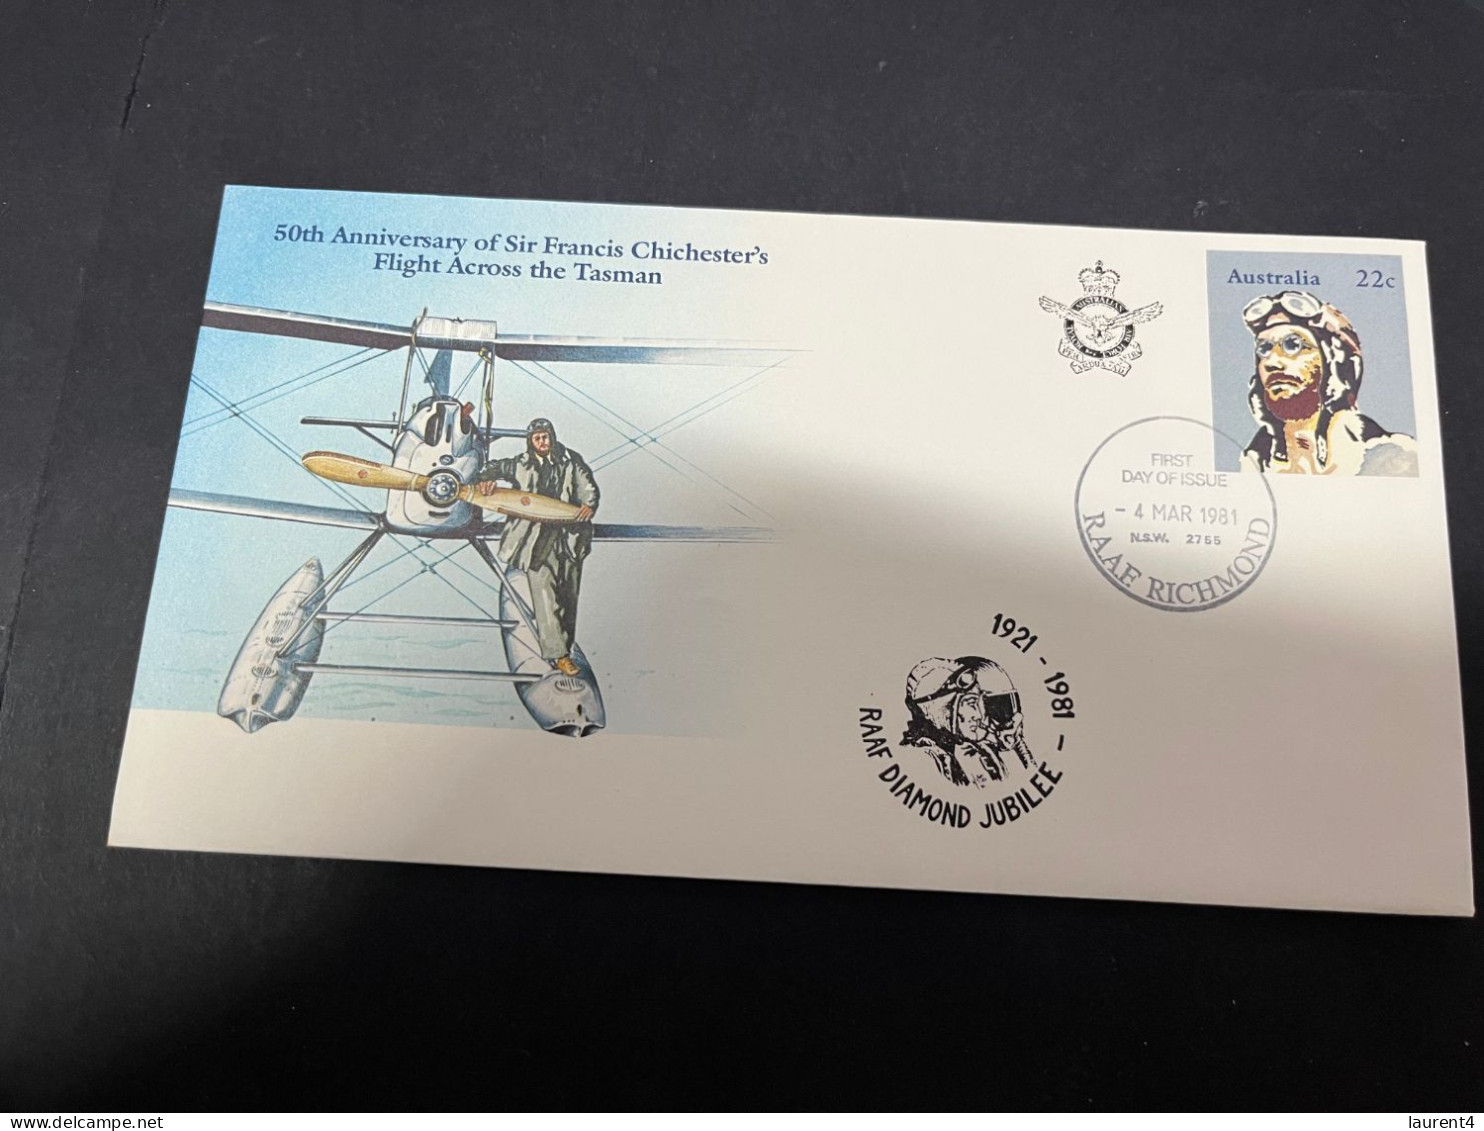 21-4-2024 (2 Z 39) Australia FDC Cover - 1981 - RAAF Diamond Jubillee (Sir Francis Chichester) 2 Covers - Premiers Jours (FDC)